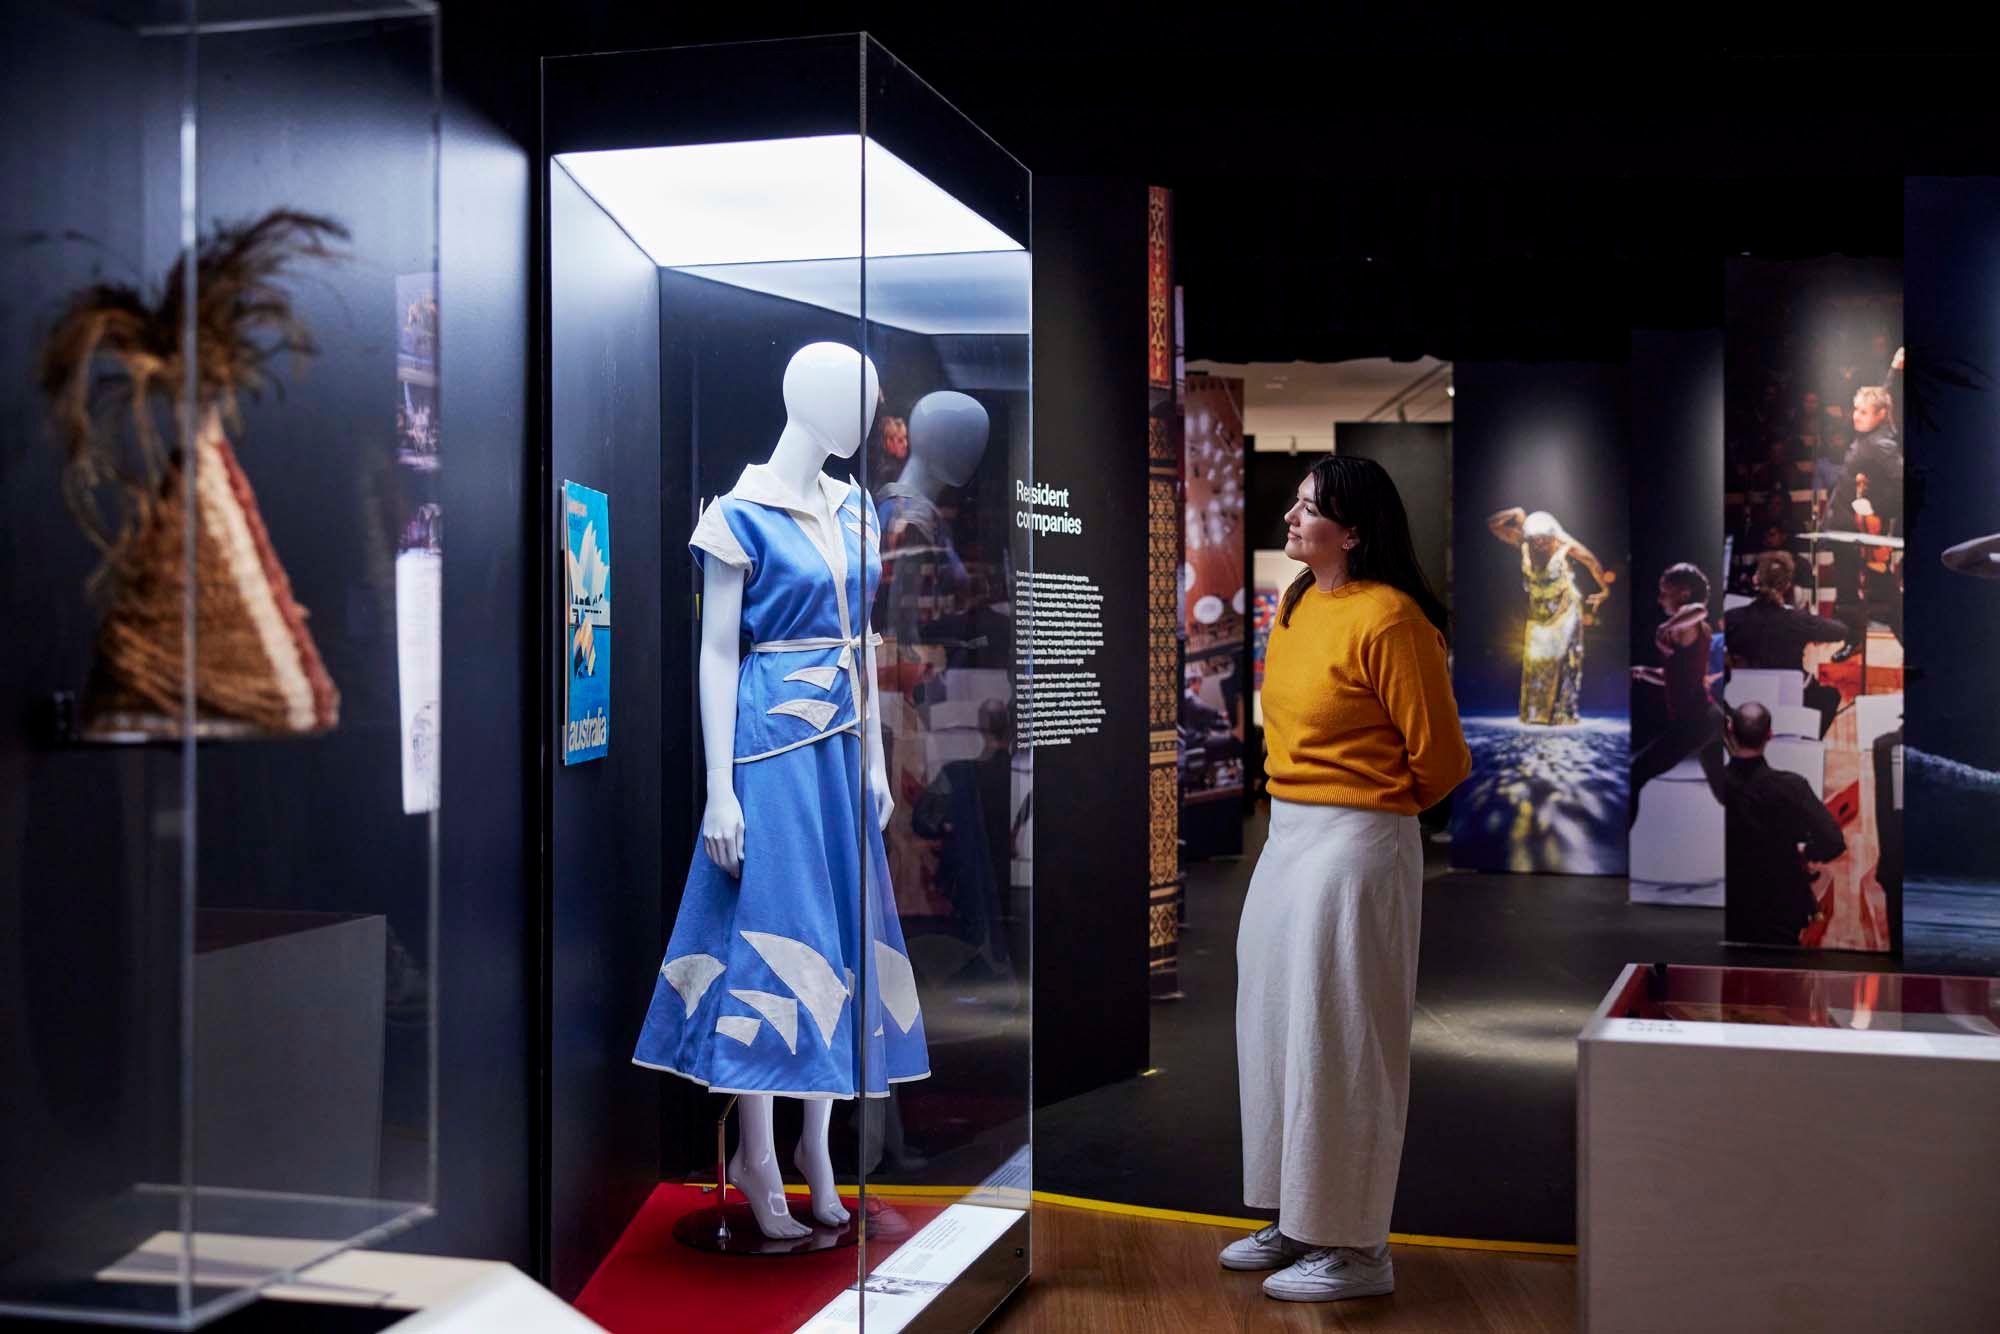 A woman browses an exhibition display of a mannequin wearing a blue dress imprinted with the sails of the Sydney Opera House